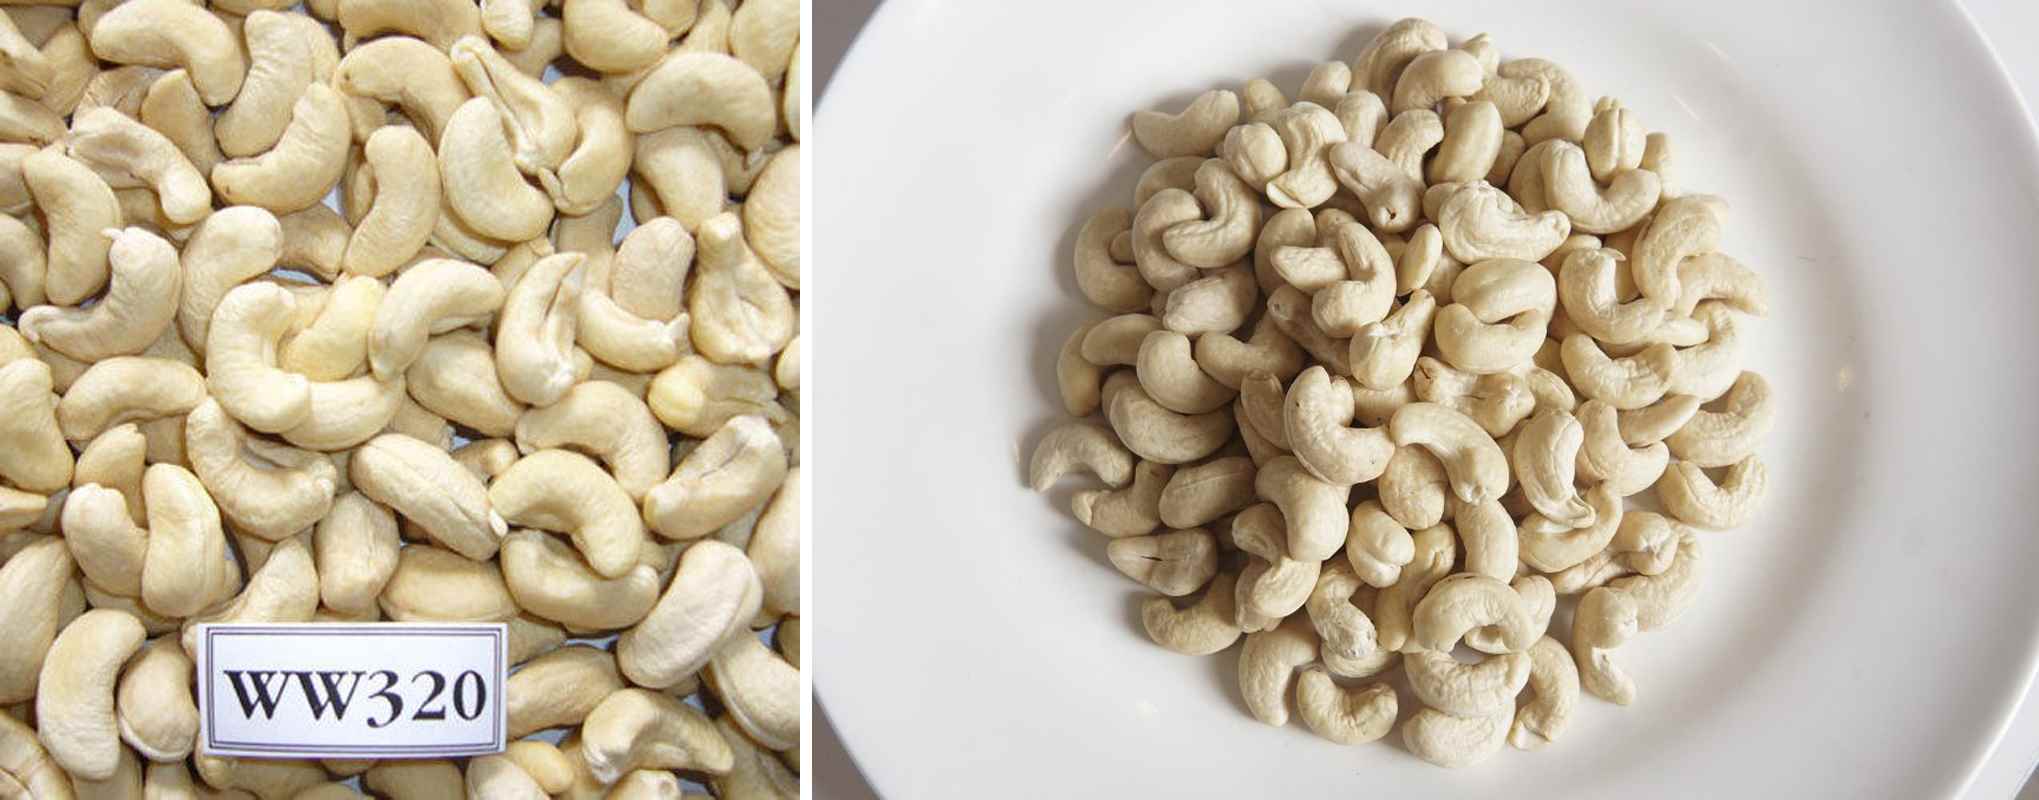 Cashew nut ww320 grade high quality, regular-size, non-damaged and non-split and white, popular whole cashew that would produce between 300 – 320 pieces per pound (453.59g) – (about 660 – 706 pieces per kg)